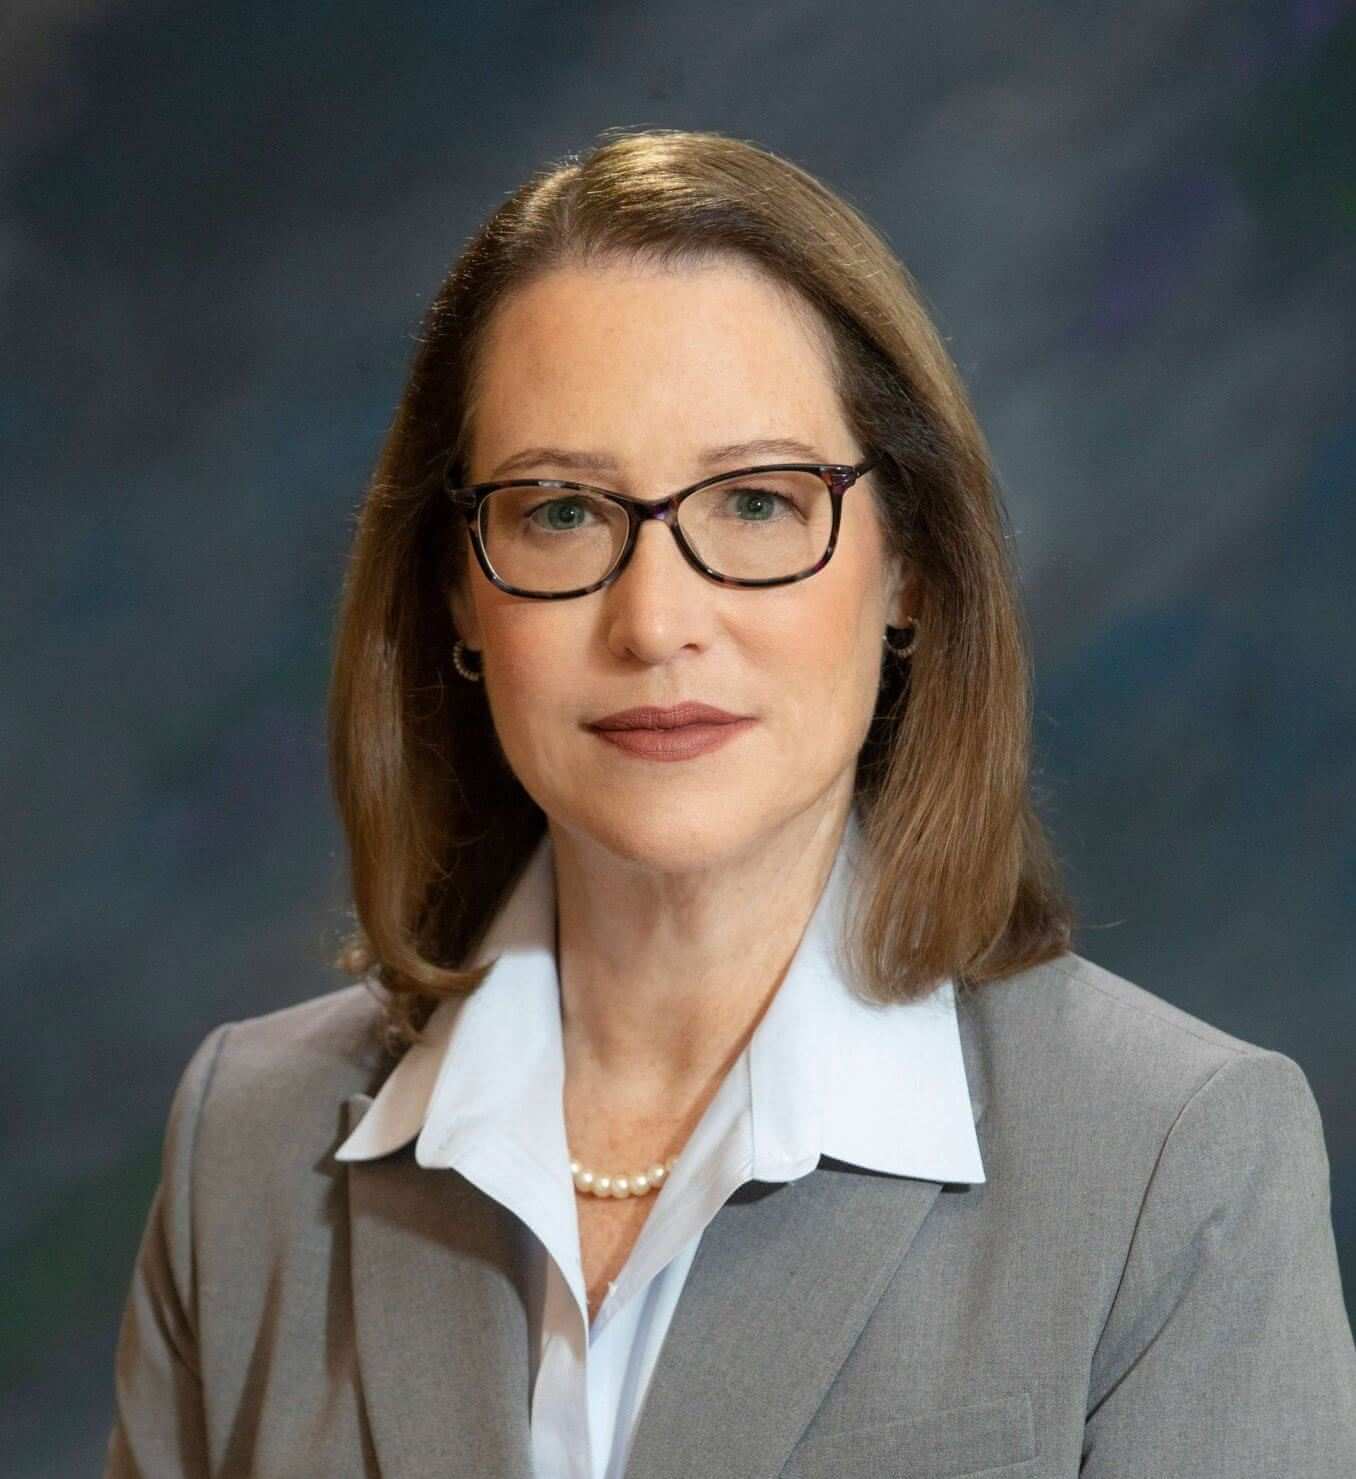 Jacqueline B. Stein, Esq. Hearing Officer for NAM (National Arbitration and Mediation)